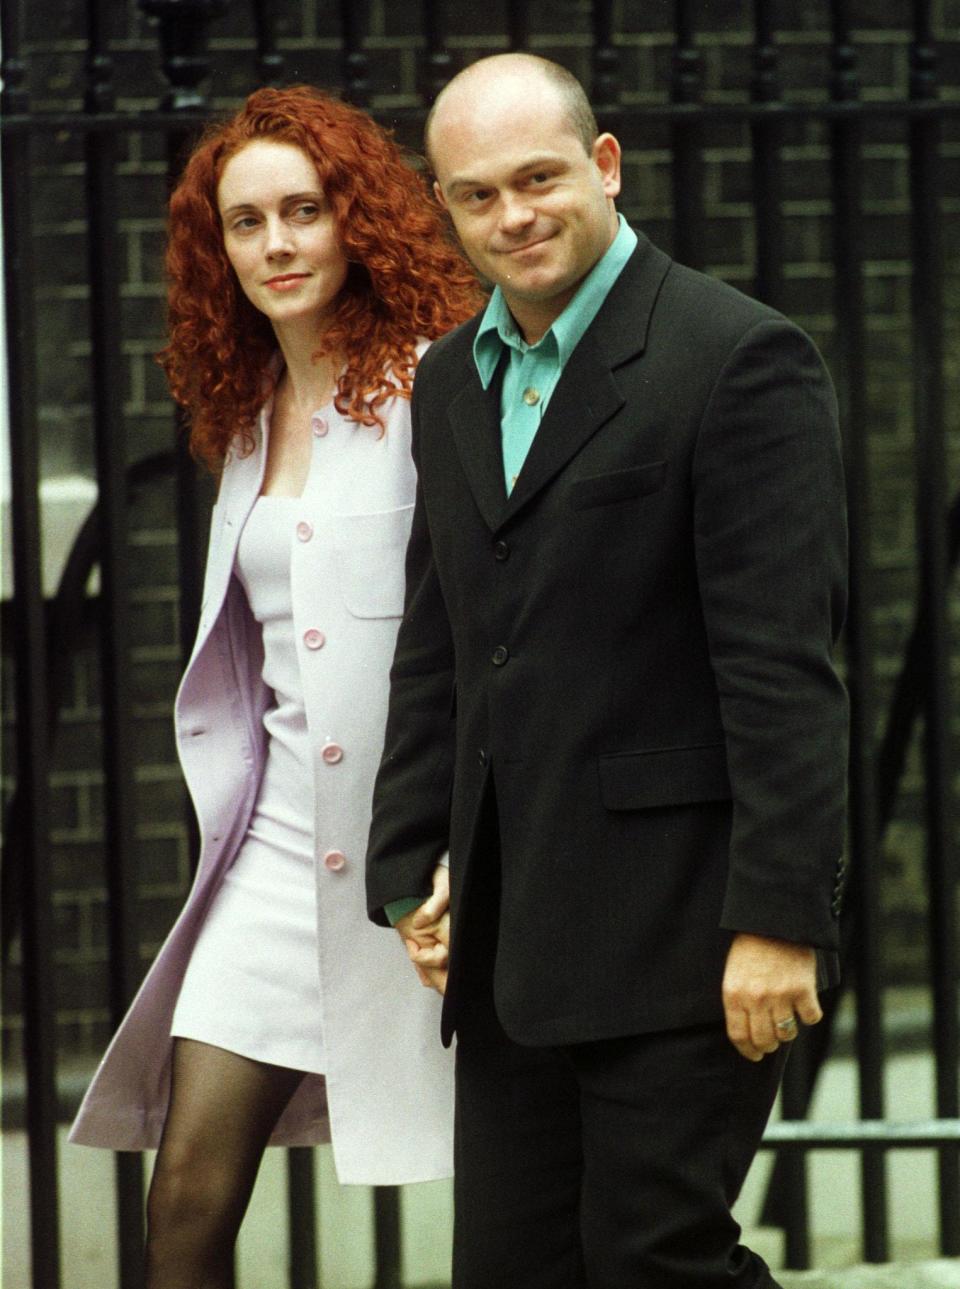 Former Eastender's star Ross Kemp arrives with an unidentified friend for a party at 10 Downing Street July 30. Prime Minister Tony Blair invited people from the show business and the media for an informal party. BRITAIN